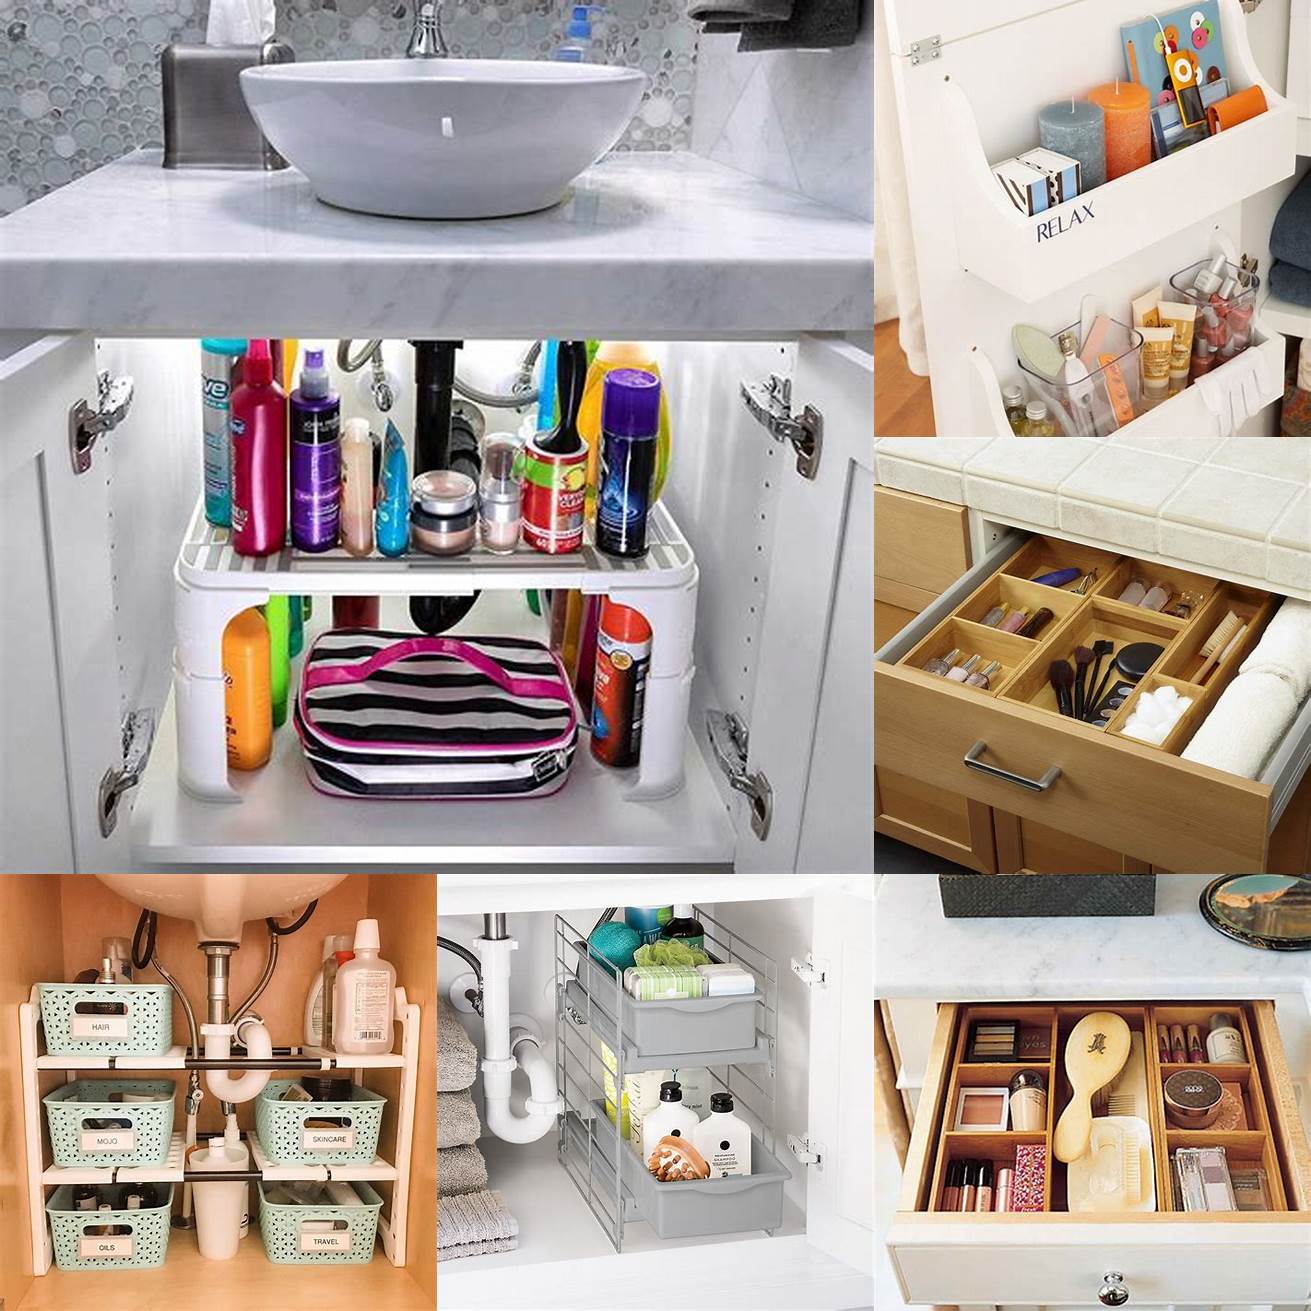 They can improve the overall storage and organization of your bathroom